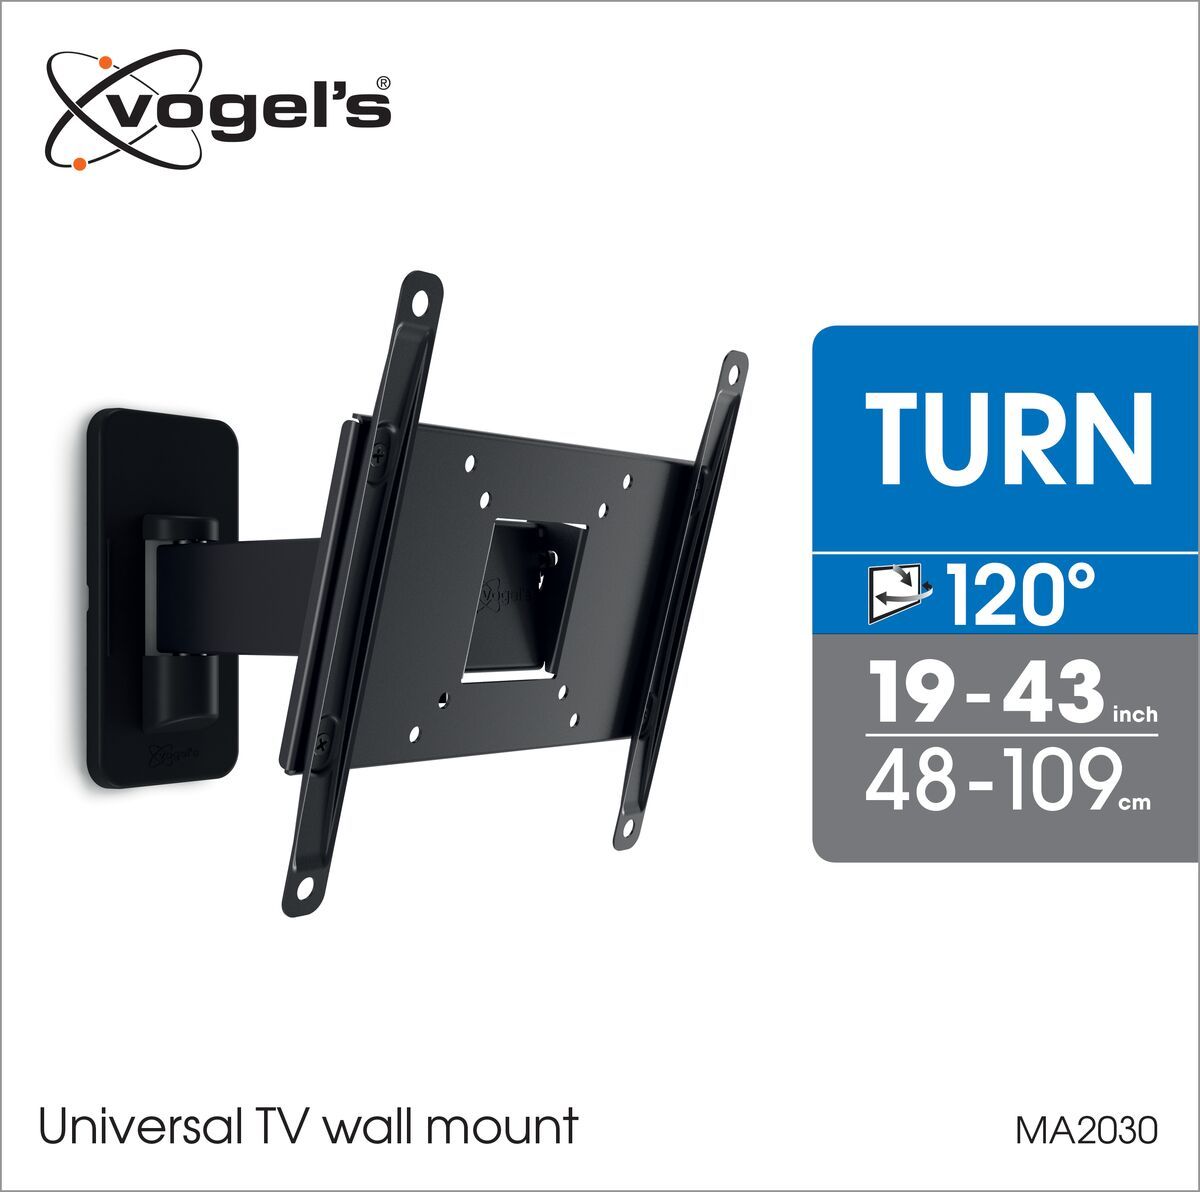 Vogel's MA 2030 - Full-Motion TV Wall Mount - Suitable for 19 up to 43 inch TVs - Motion (up to 120°) - Tilt up to 15° - Packaging front